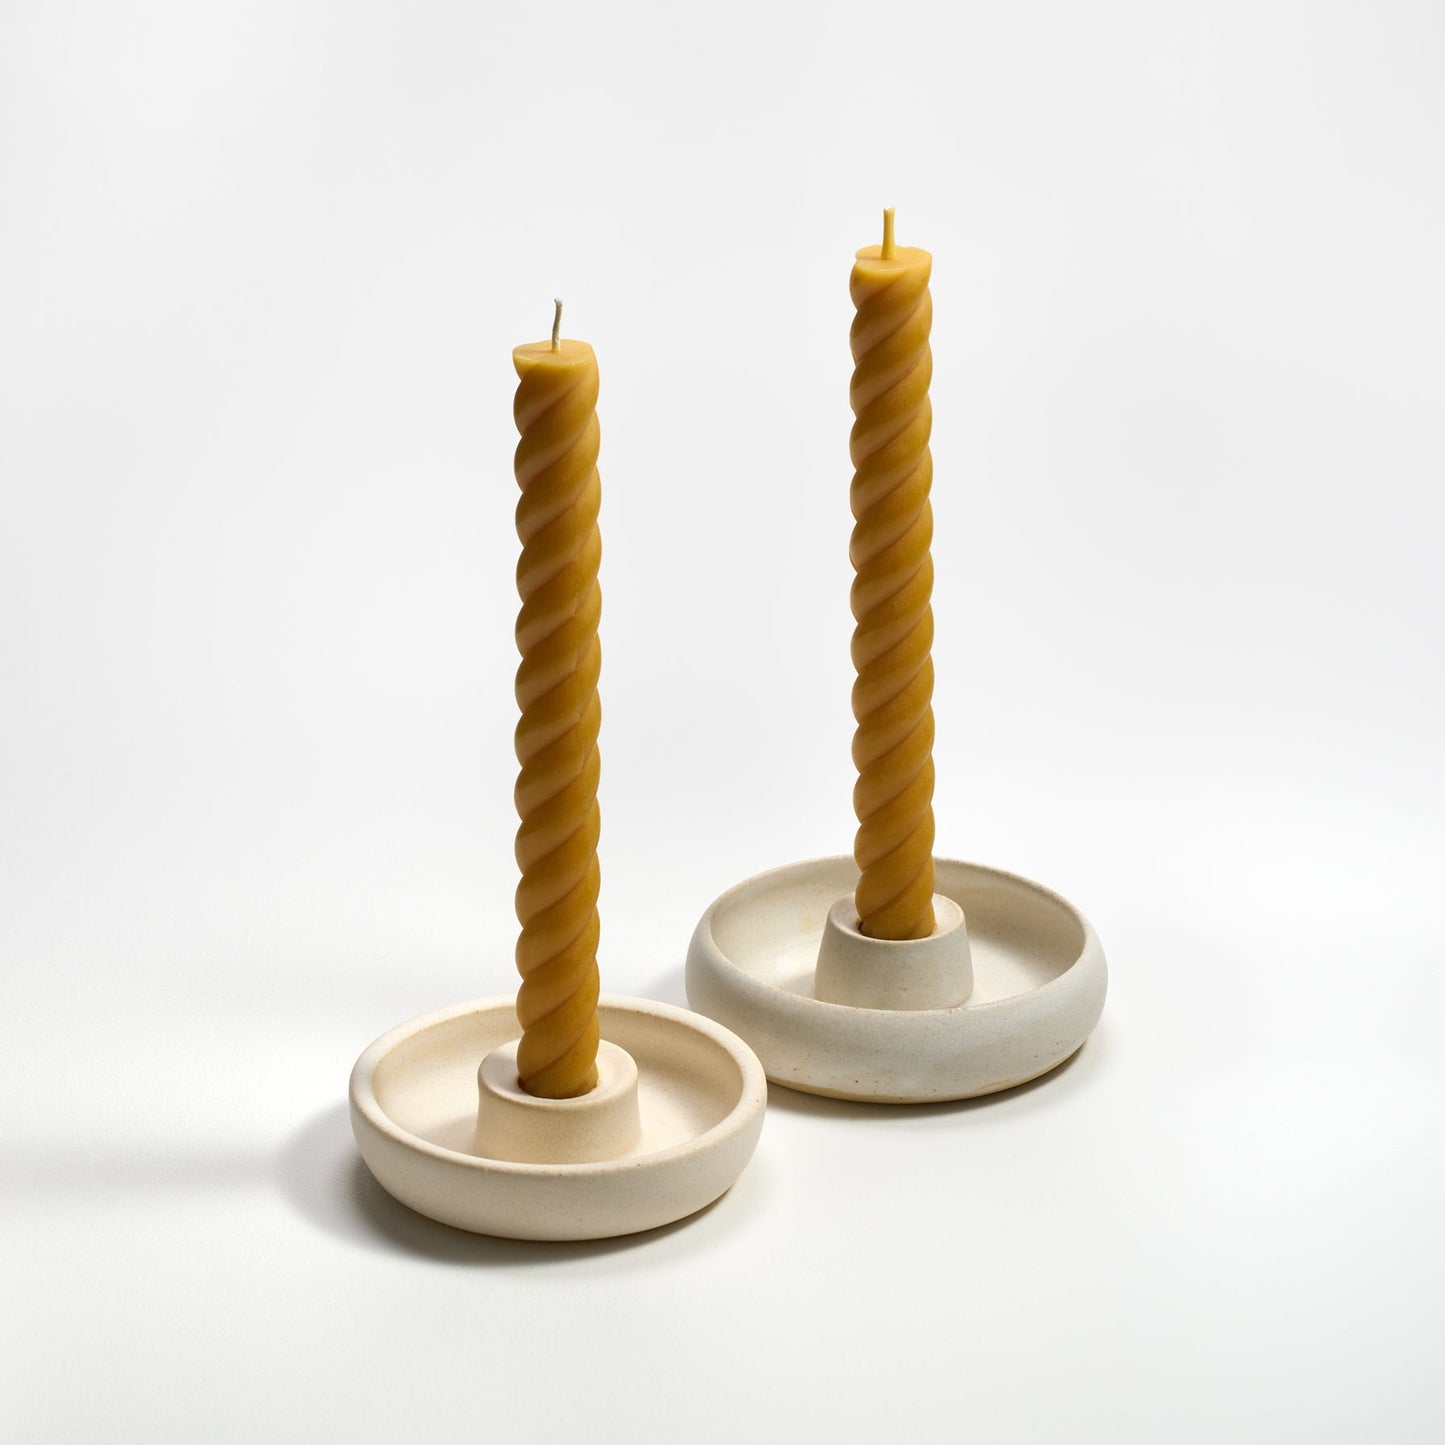 greentree home candle / An elegant and playful twist on the classic taper. Set of 2, 100% pure North American beeswax candles. Each candle is hand poured and individually finished in New York State.